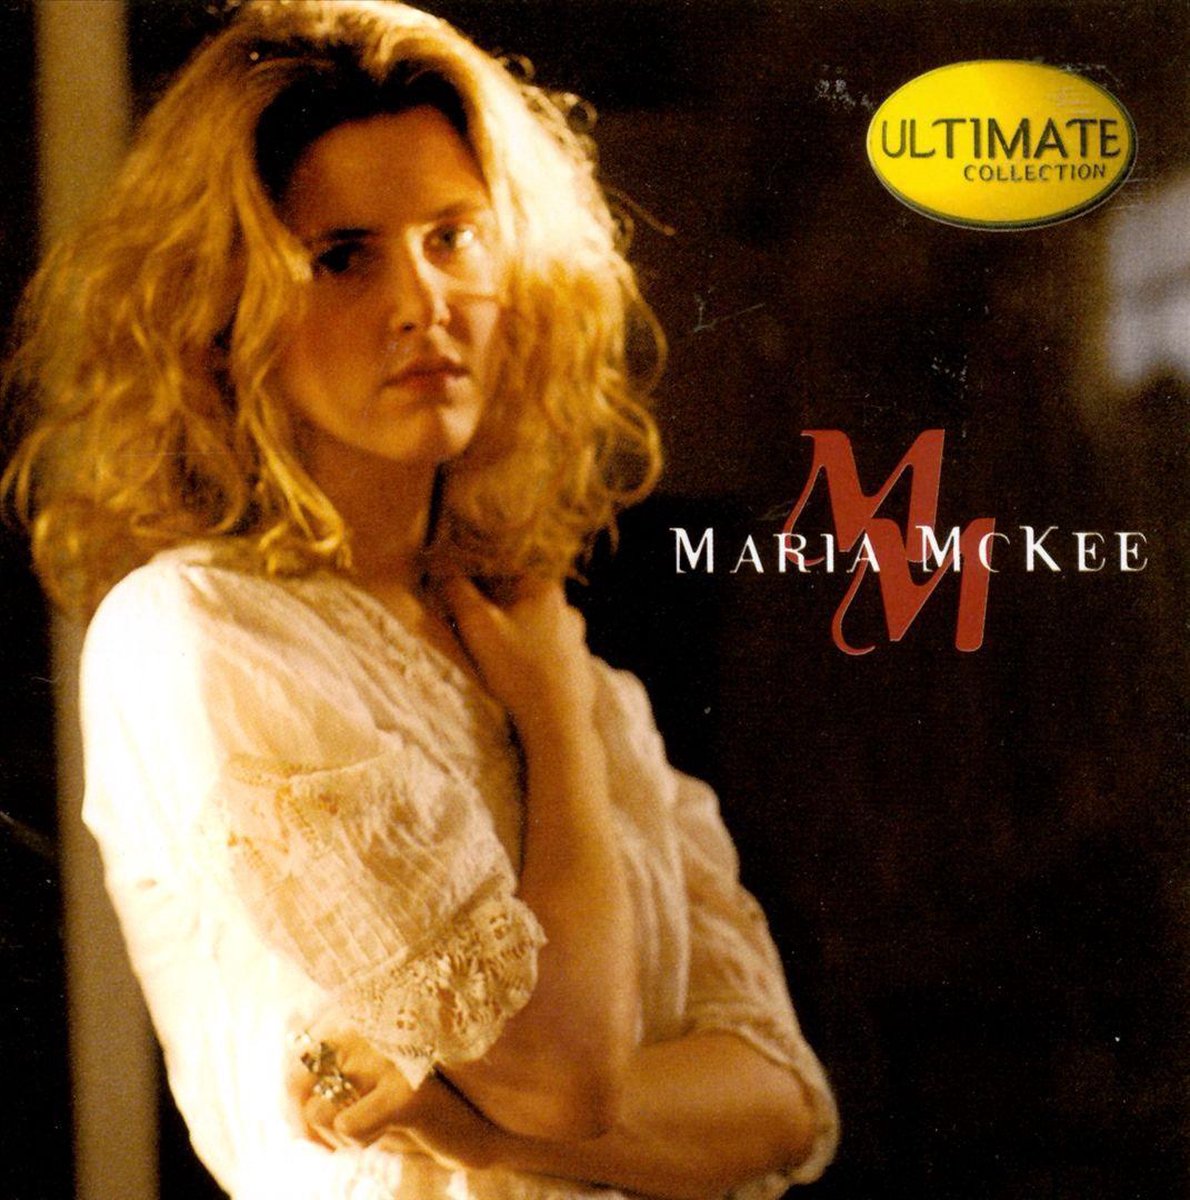 Ultimate Collection - Maria Mckee